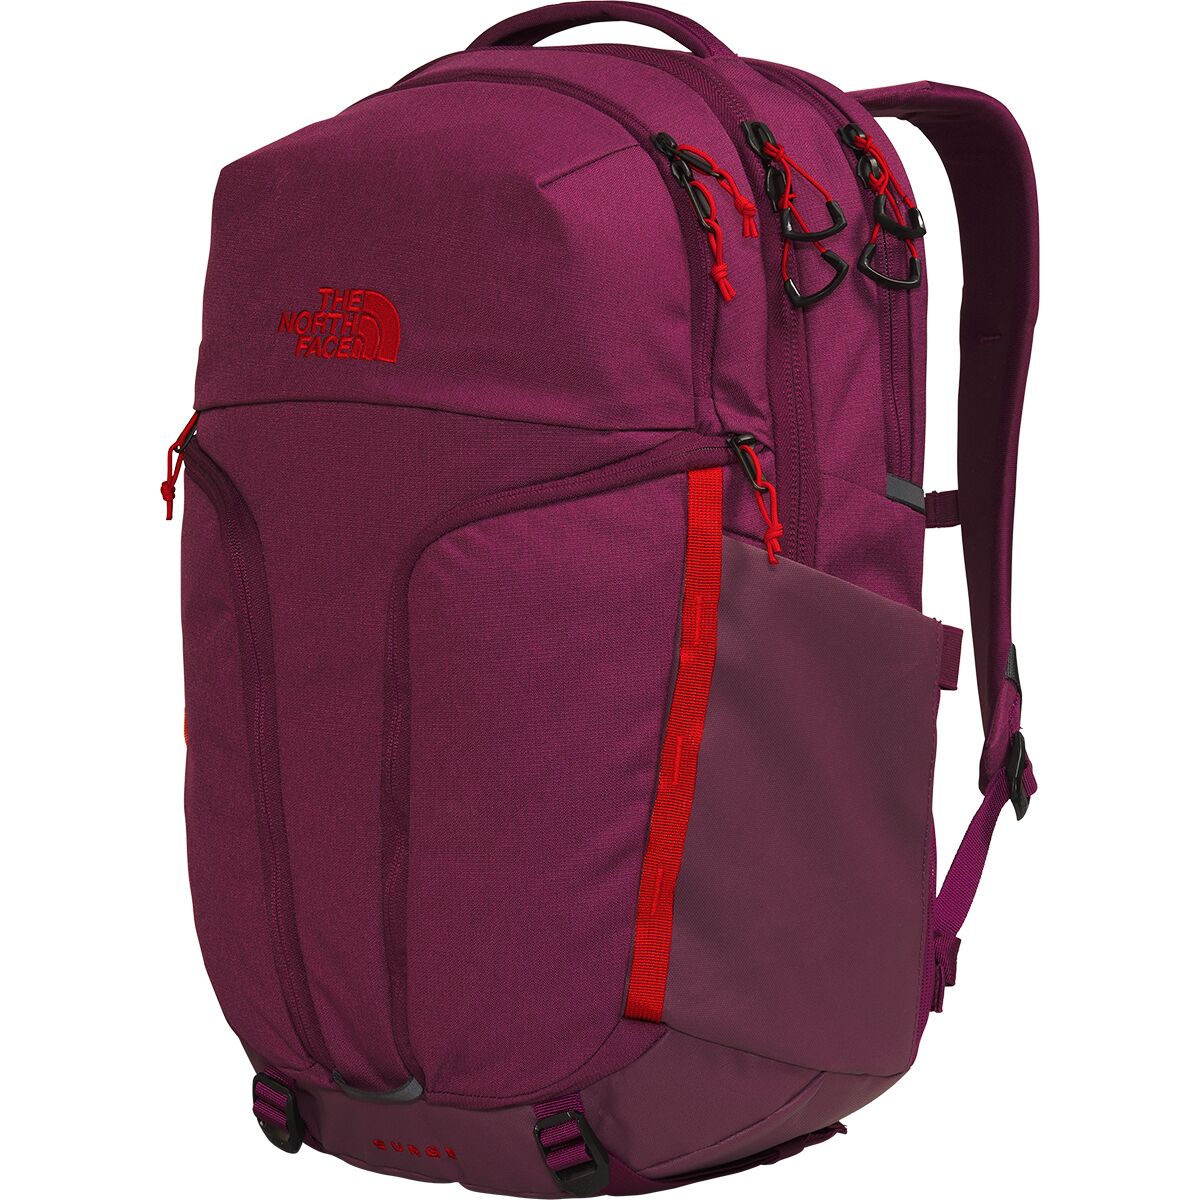 The North Face Surge 31L Backpack - Women's